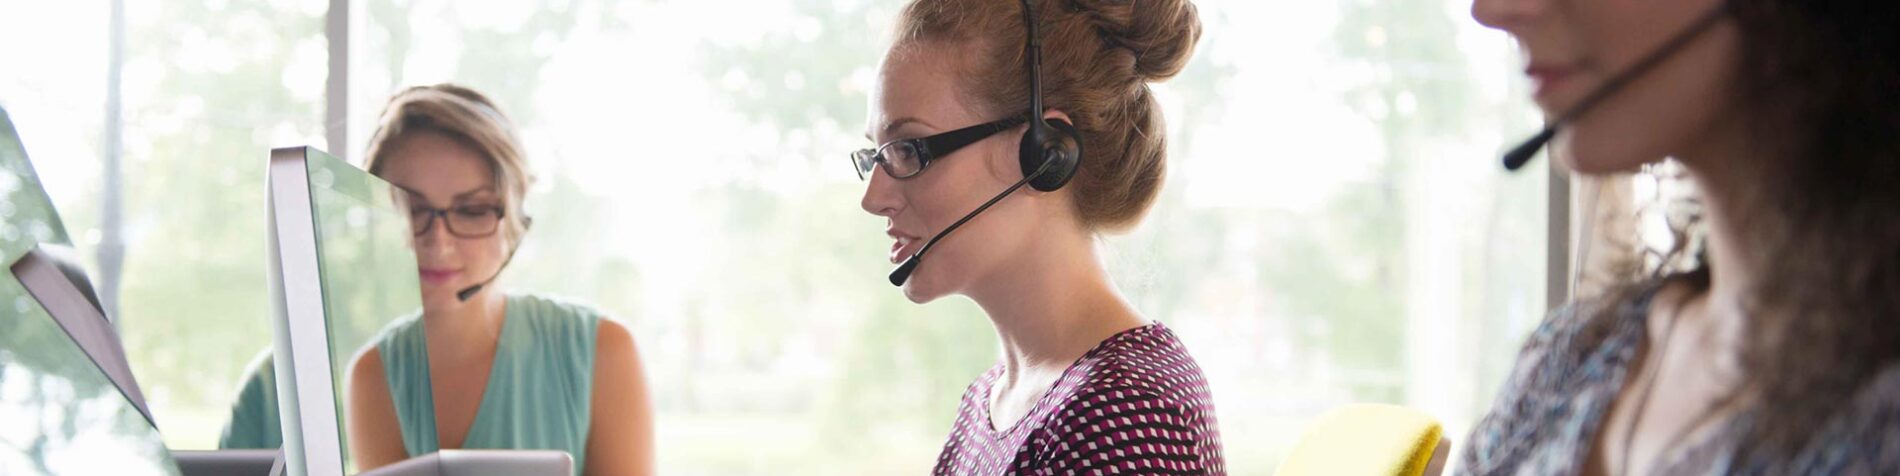 Expert Chat Service Provides SAP Customers with Access to Live, Real-Time Support Options